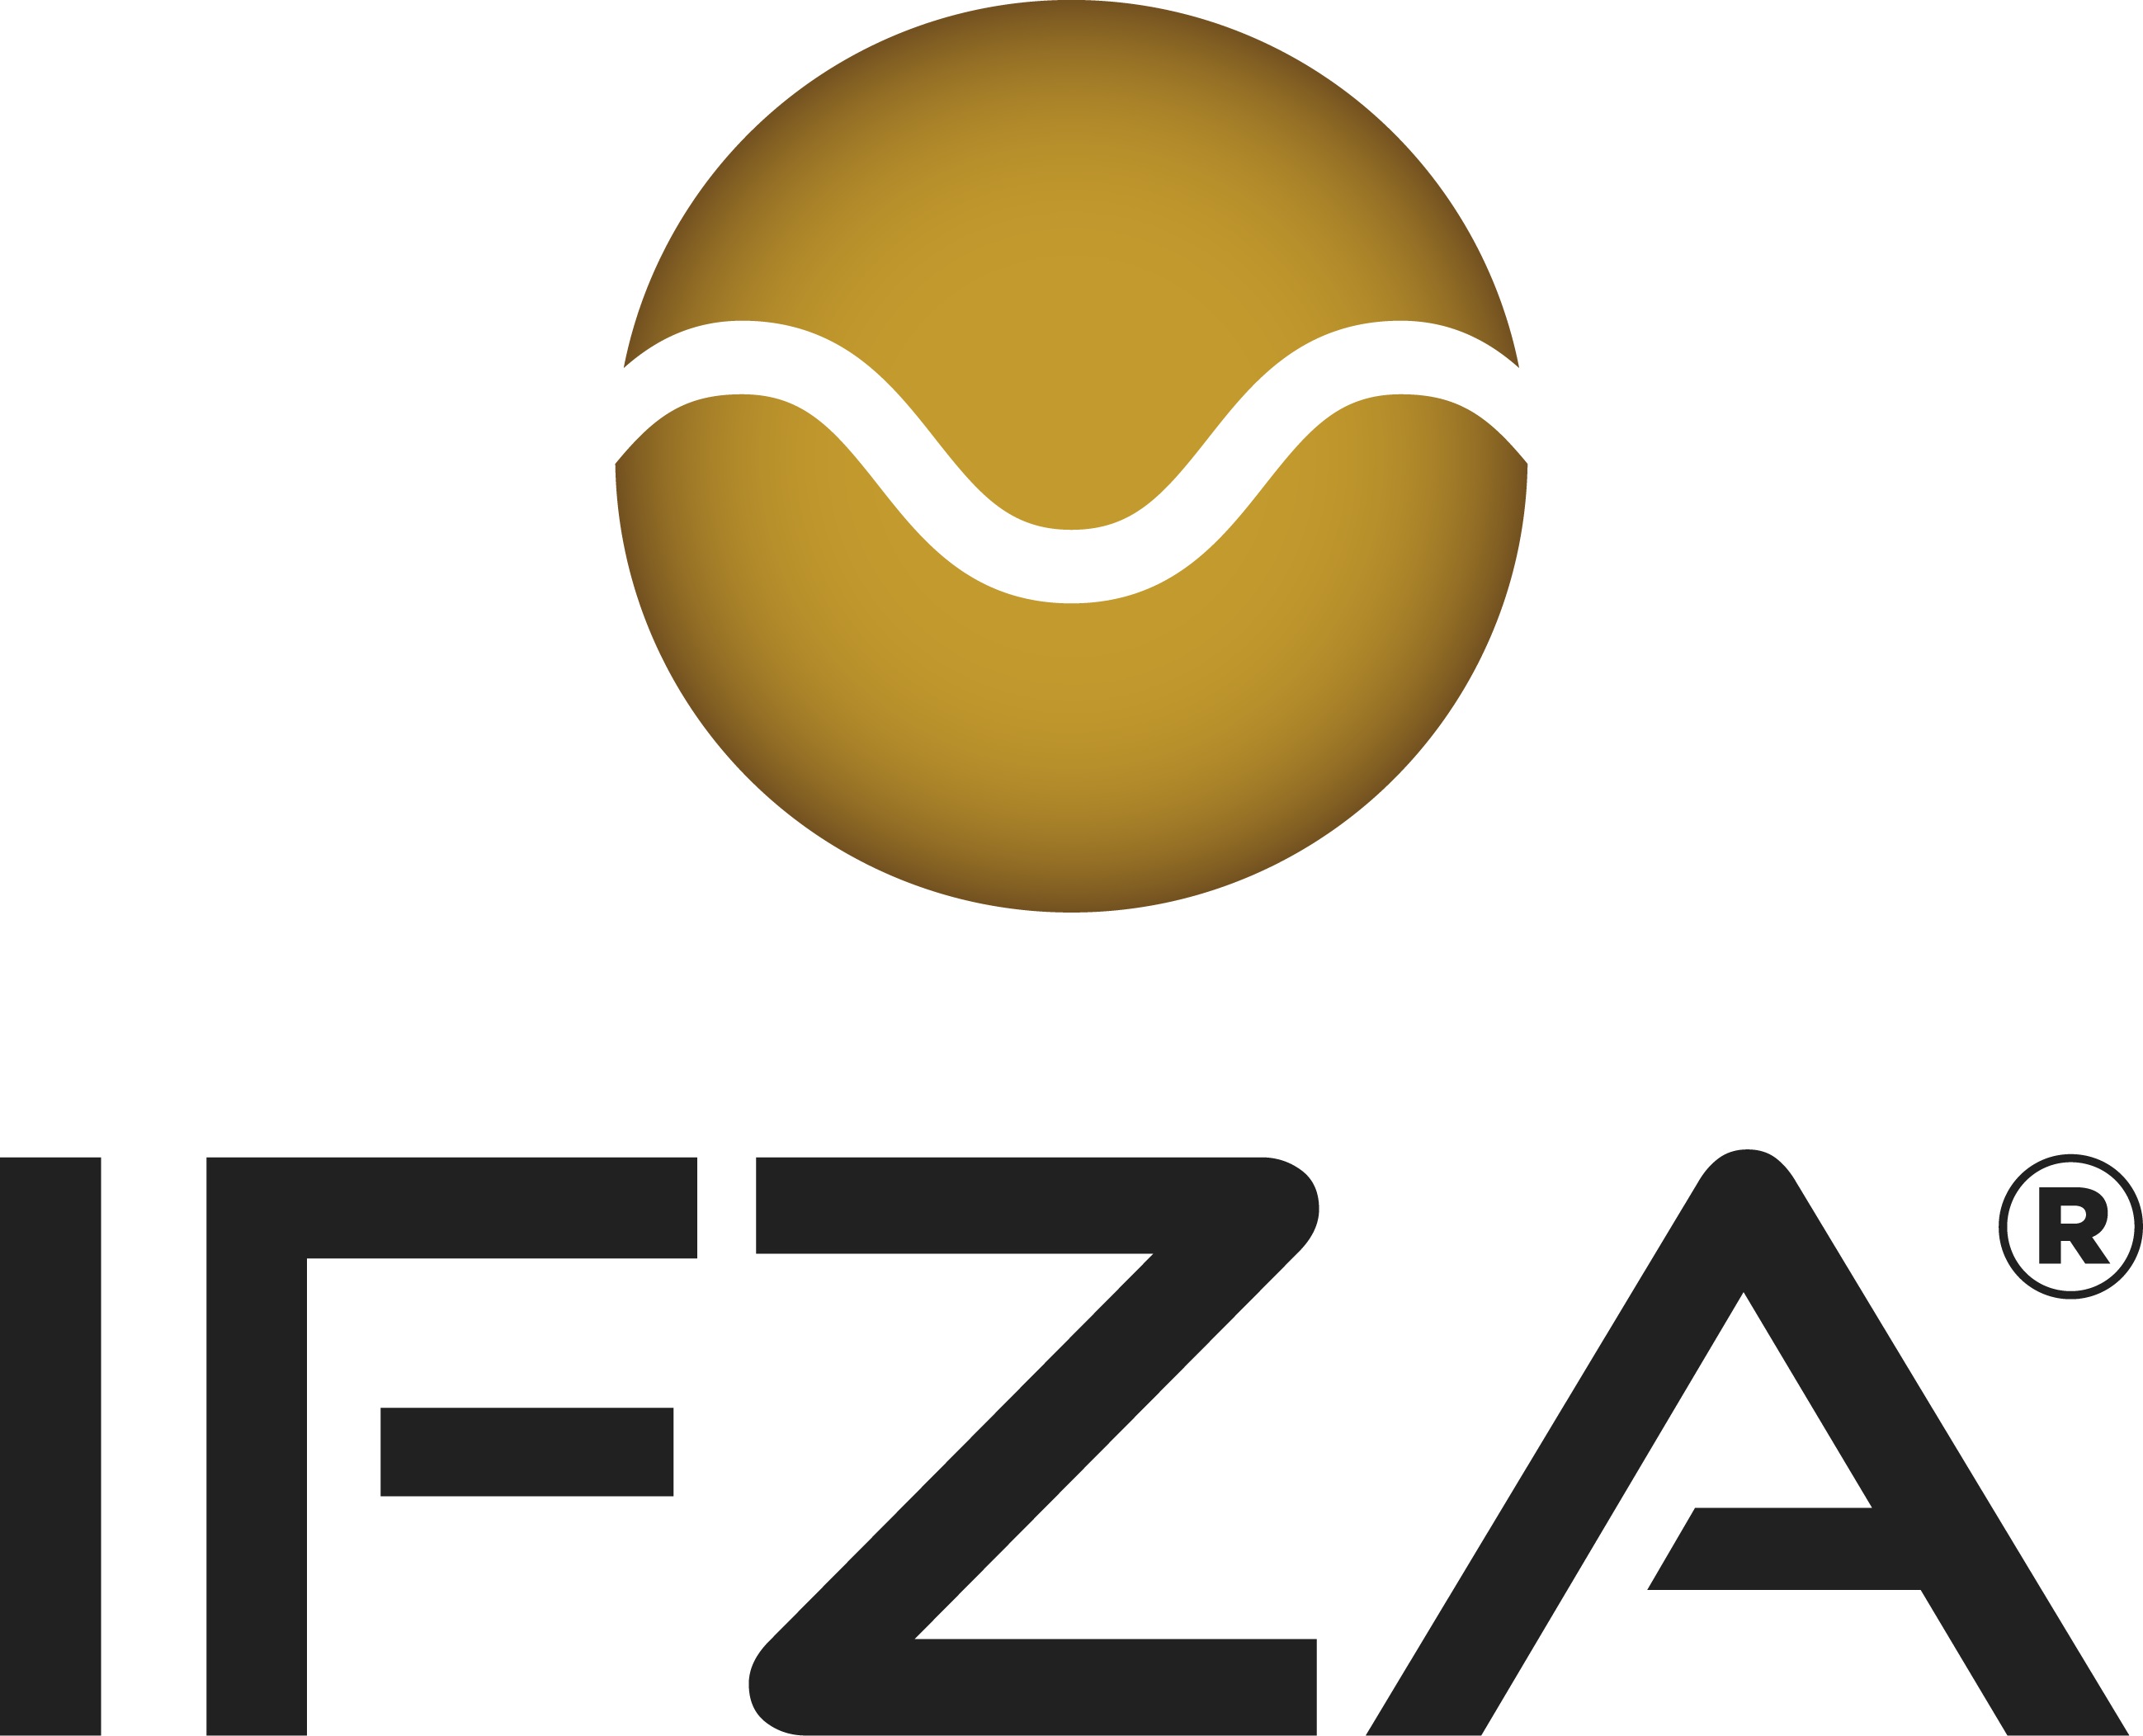 Professional Authorised Partner with IFZA in the UAE | Ghanem Law Firm